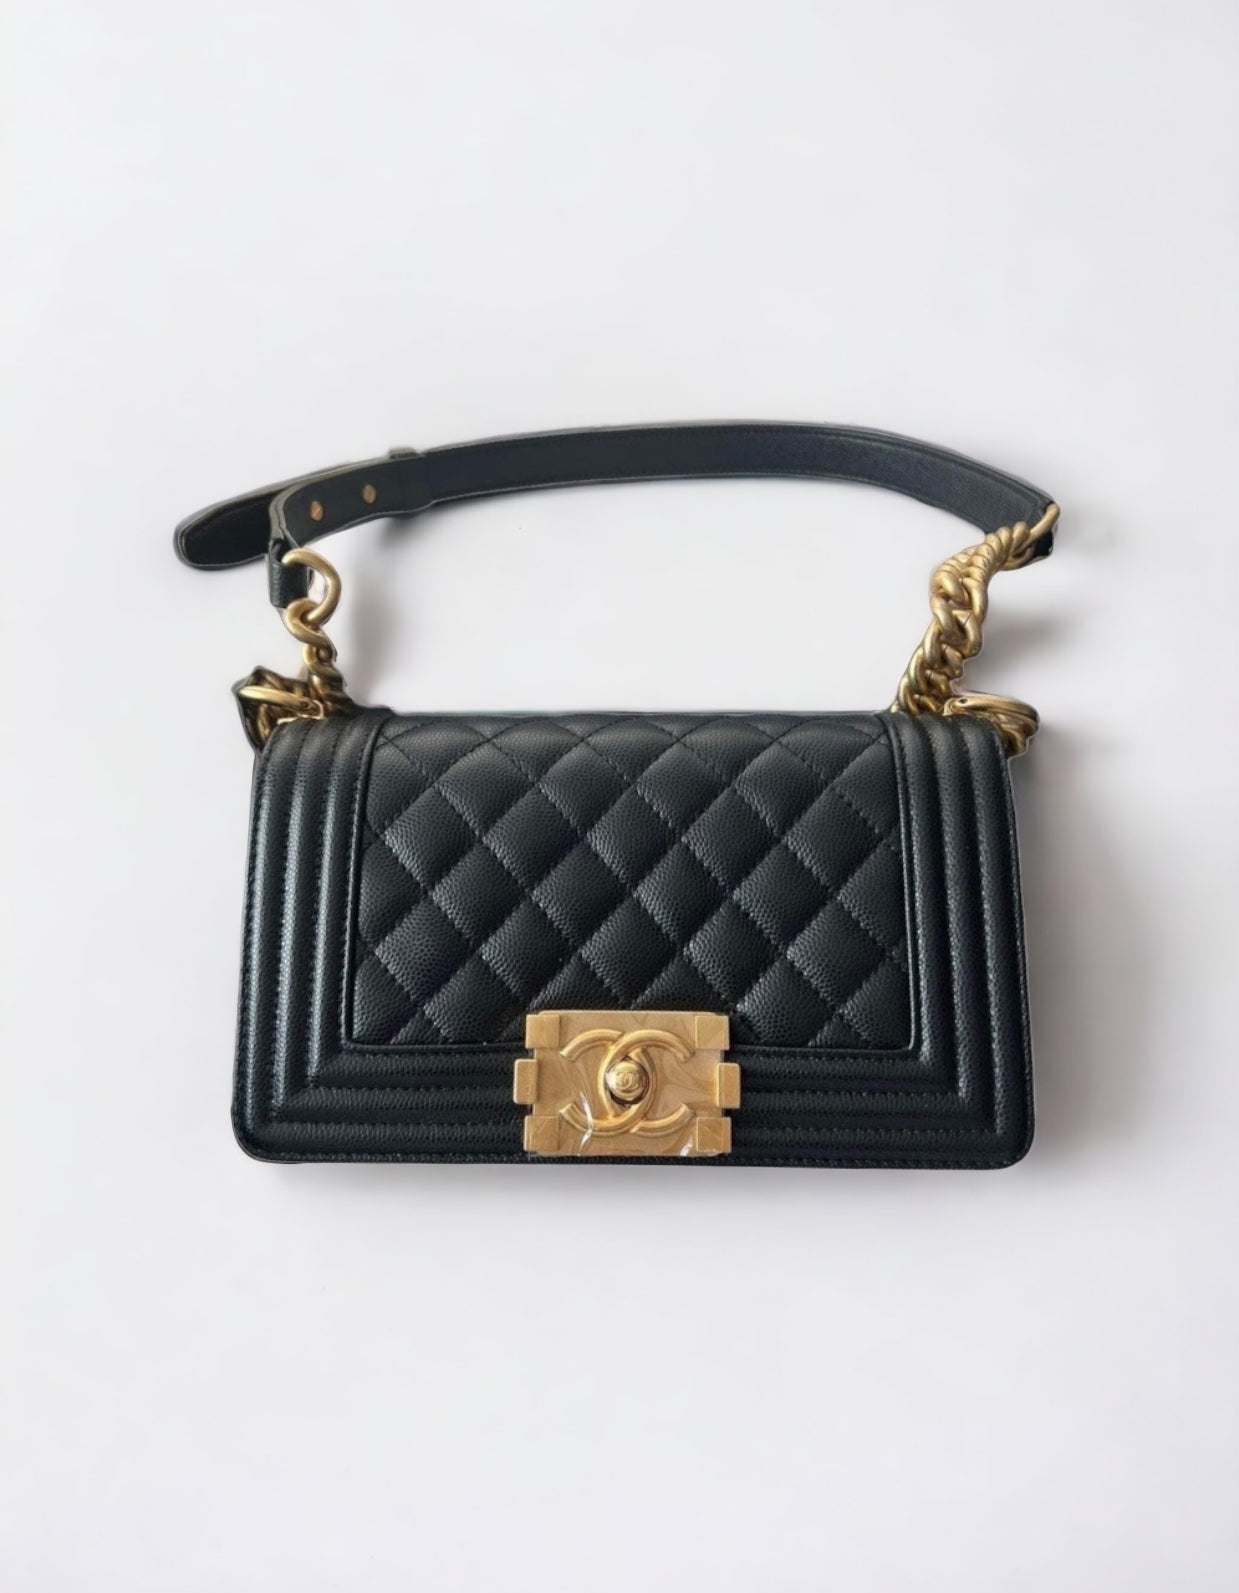 Chanel Wallet Pink Caviar 22S – The Woman Behind The Brand